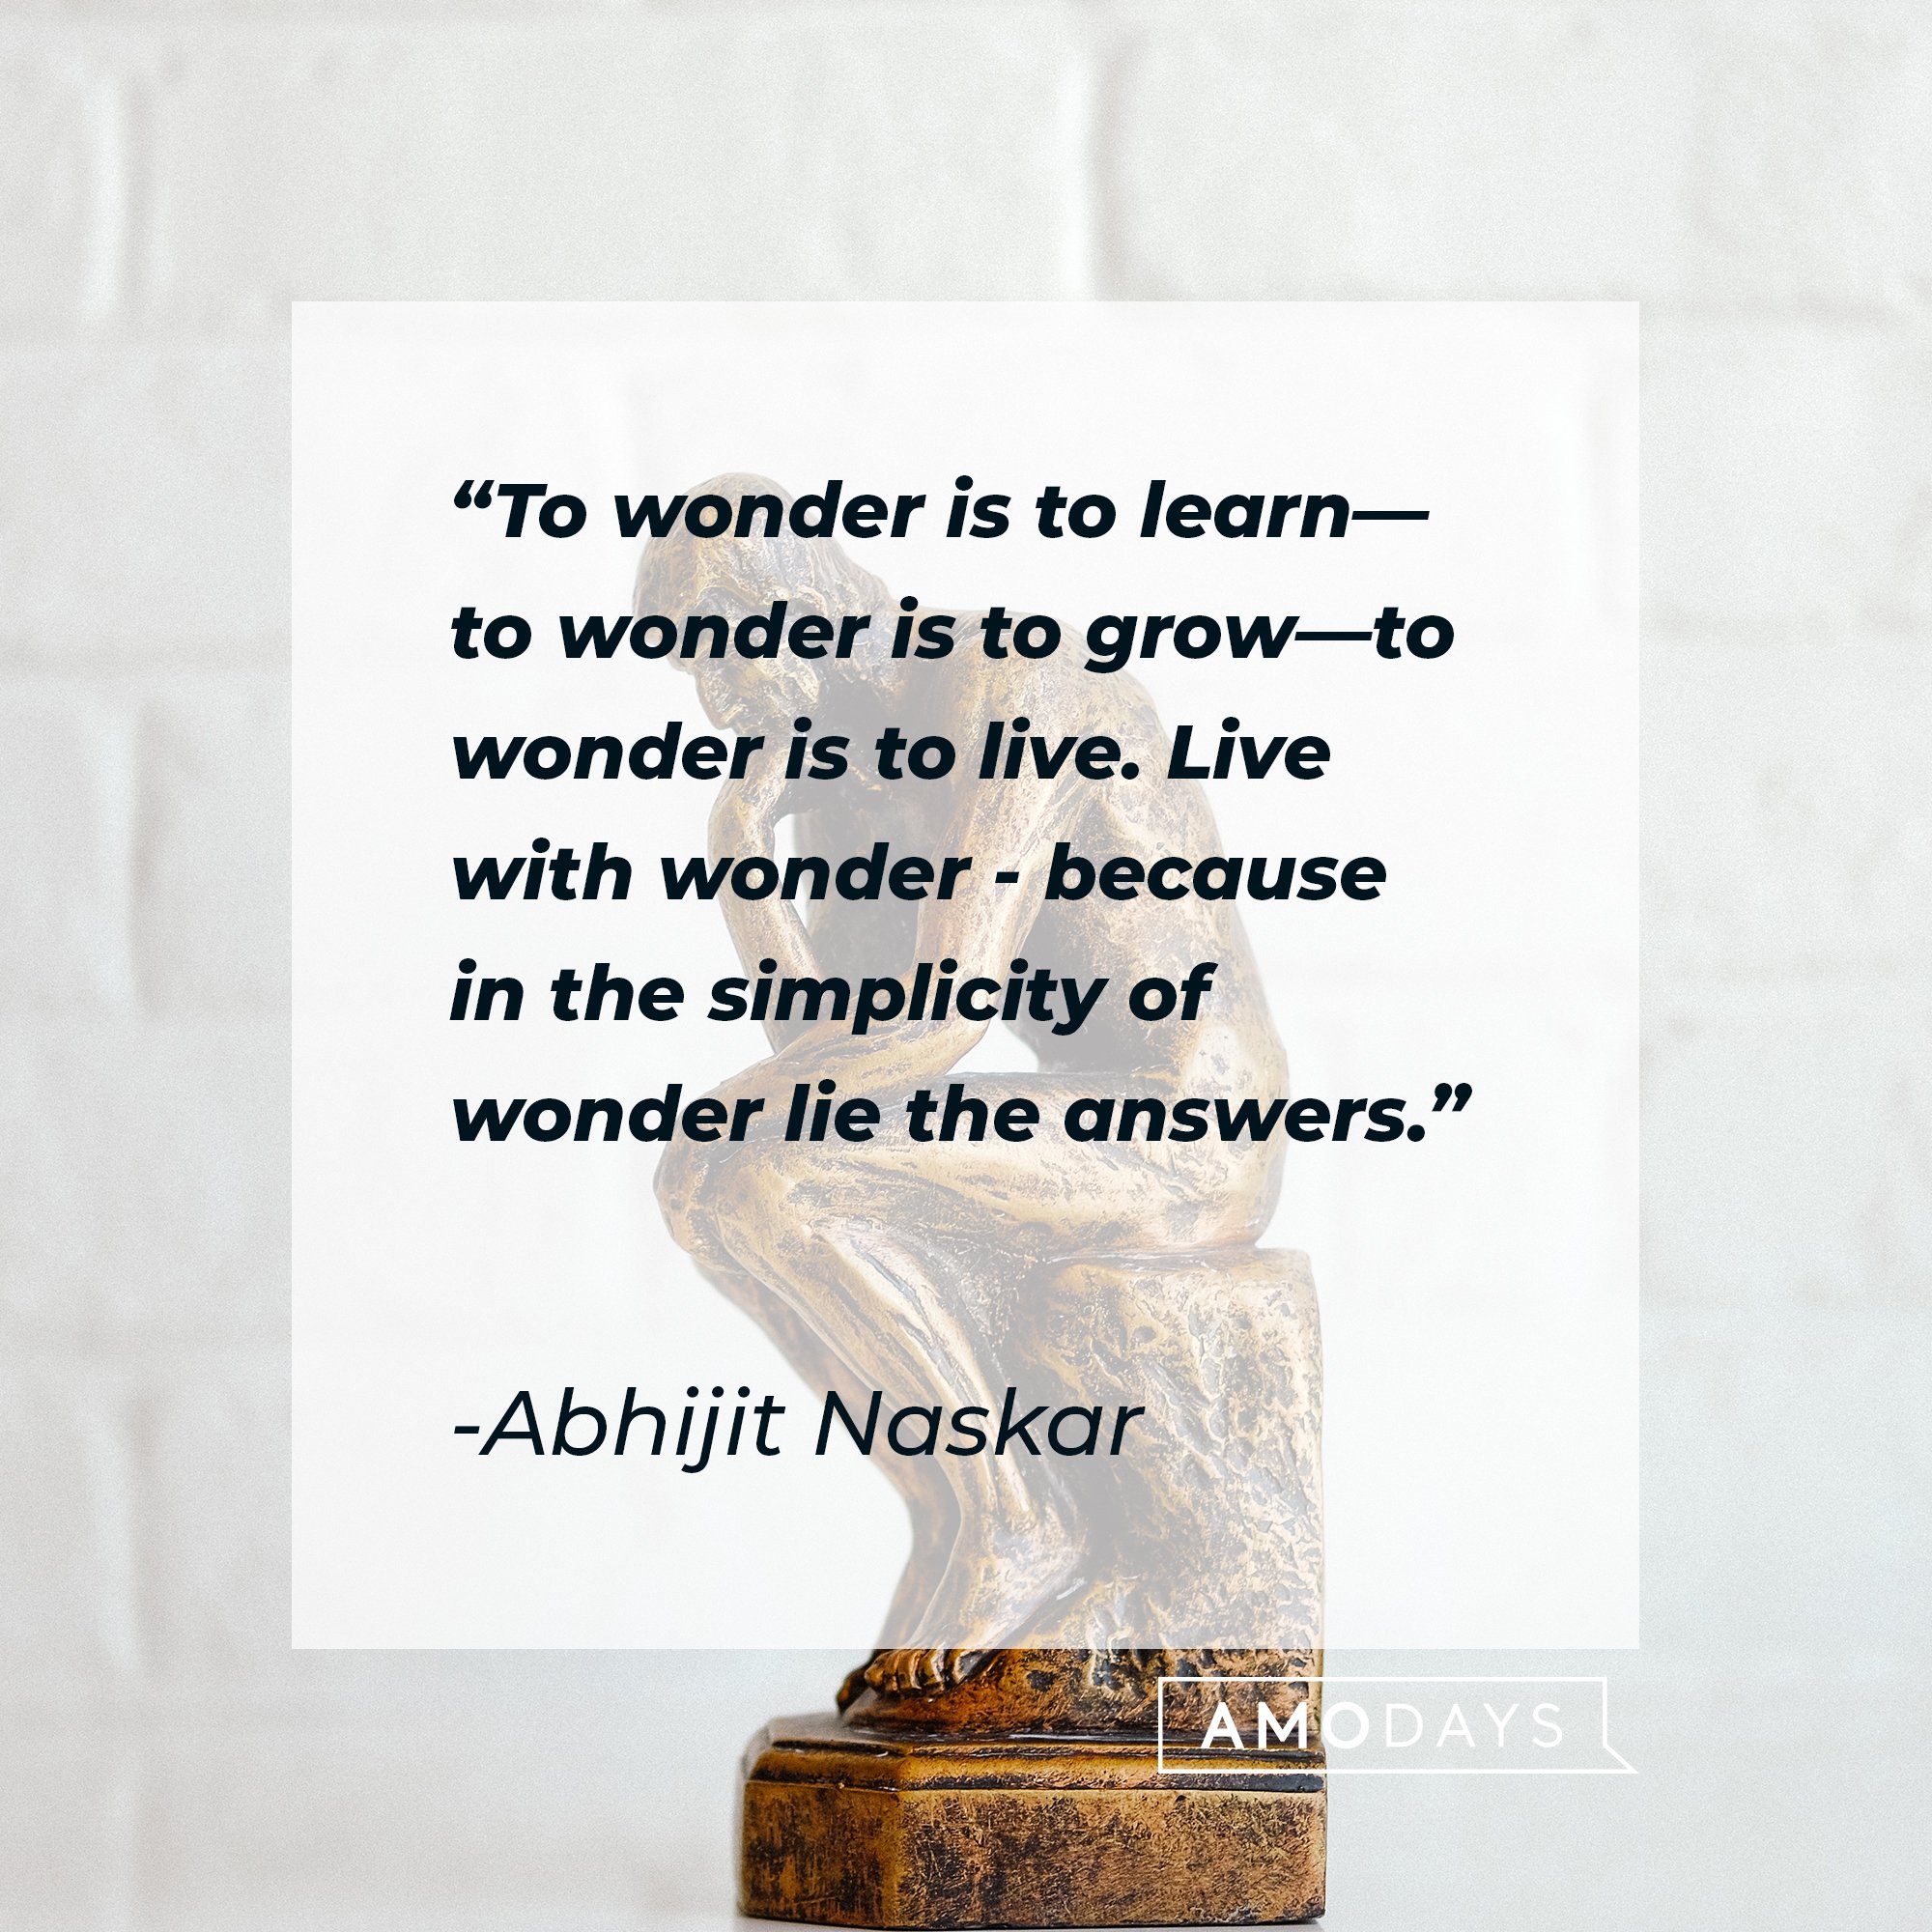  Abhijit Naskar’s quote: "To wonder is to learn - to wonder is to grow - to wonder is to live. Live with wonder - because in the simplicity of wonder lie the answers.” | Image: AmoDays